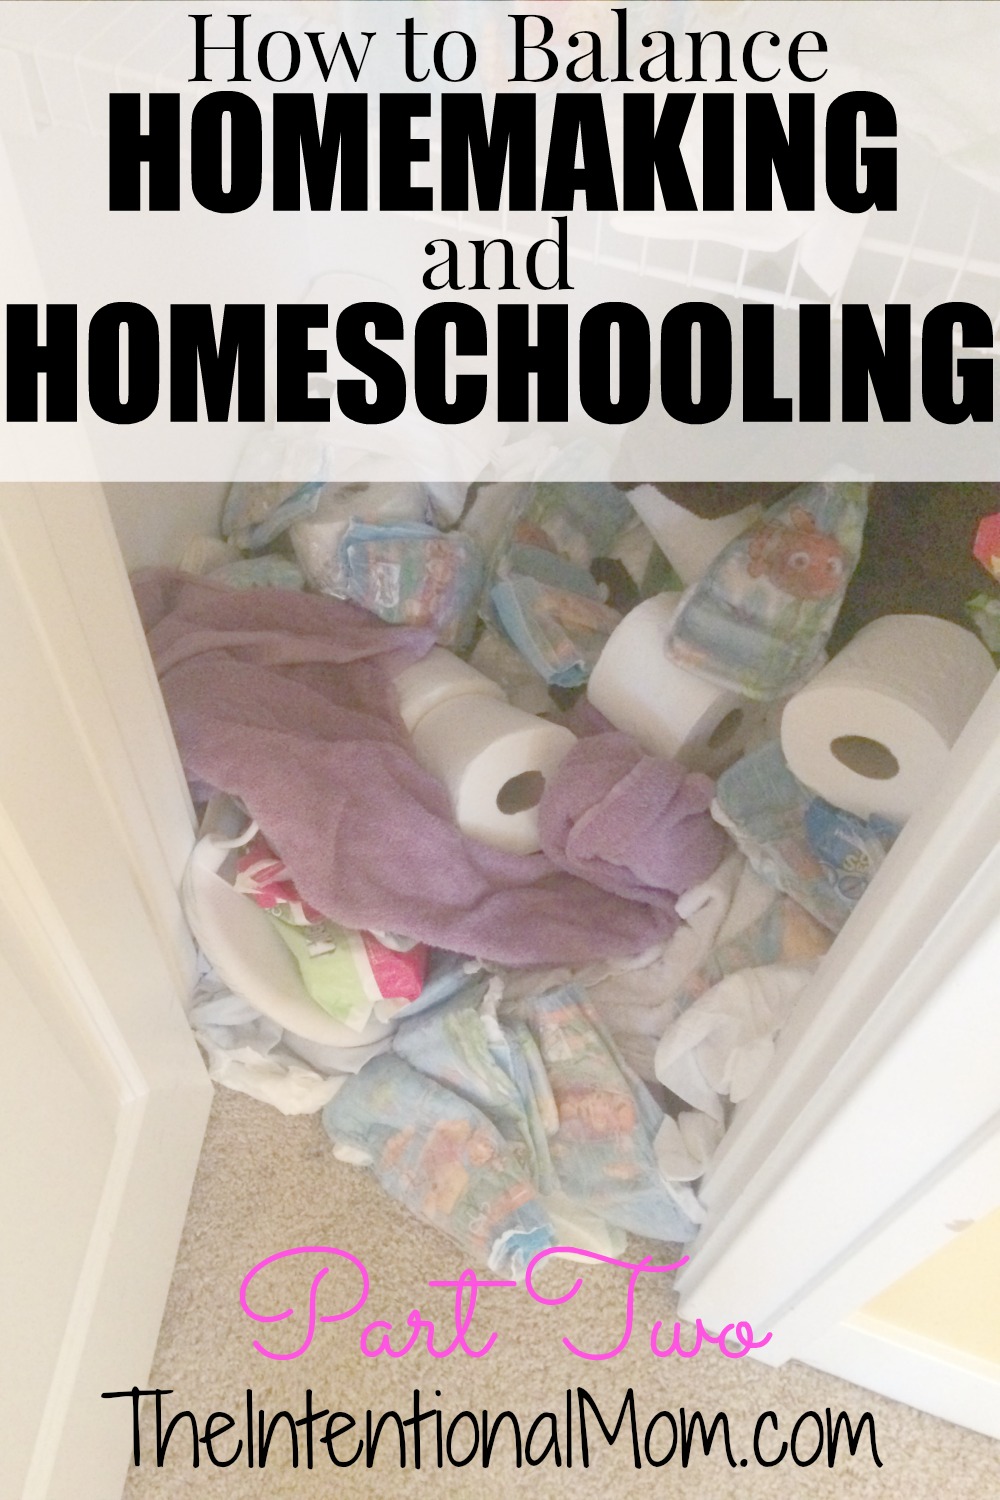 How to Balance Homemaking and Homeschooling Part Two